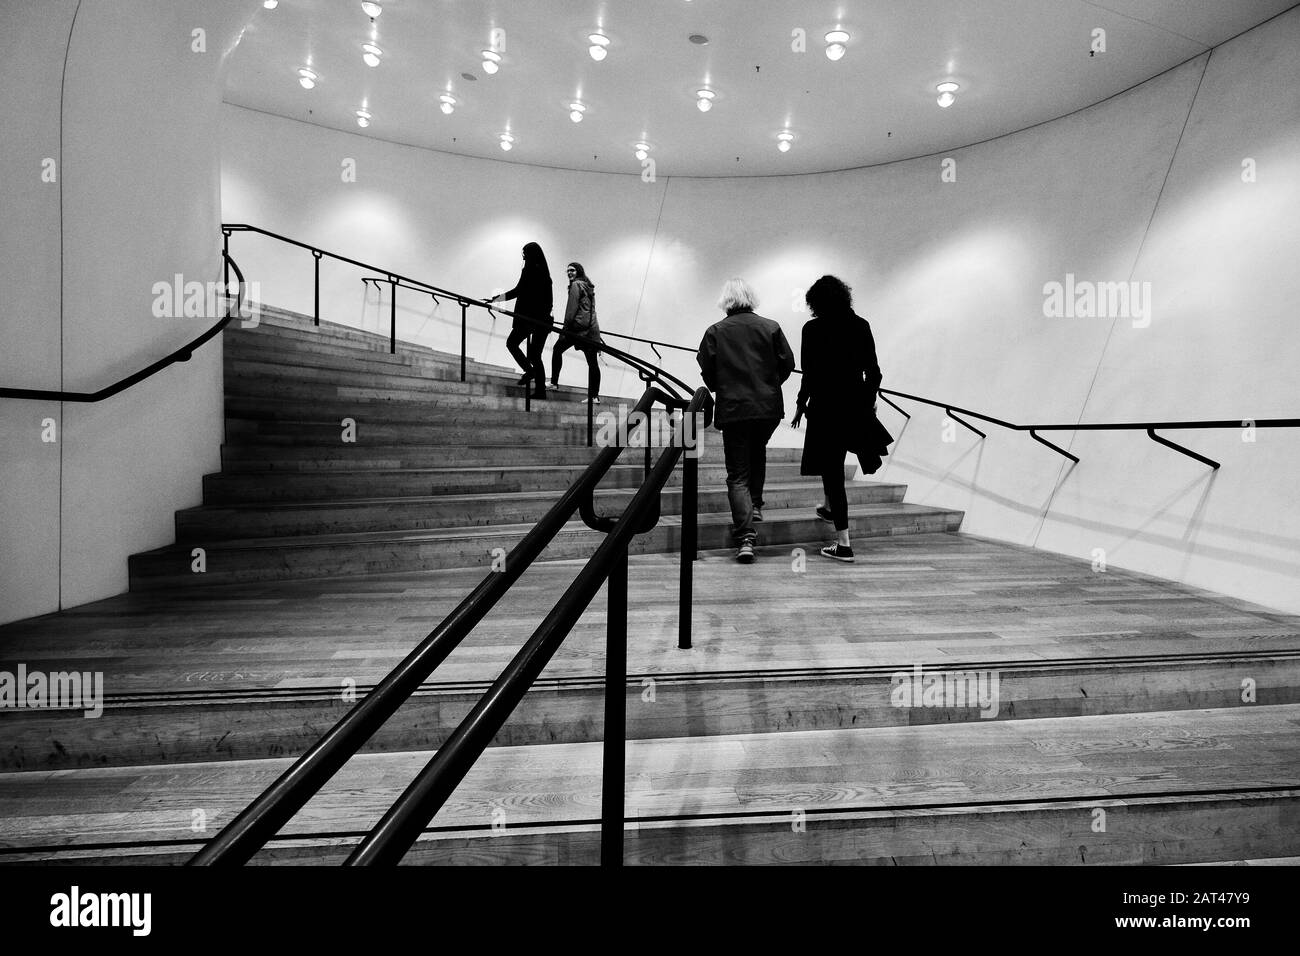 Staircase in the Elbphilharmonie concert hall in the port of Hamburg, Hamburg, Germany Stock Photo